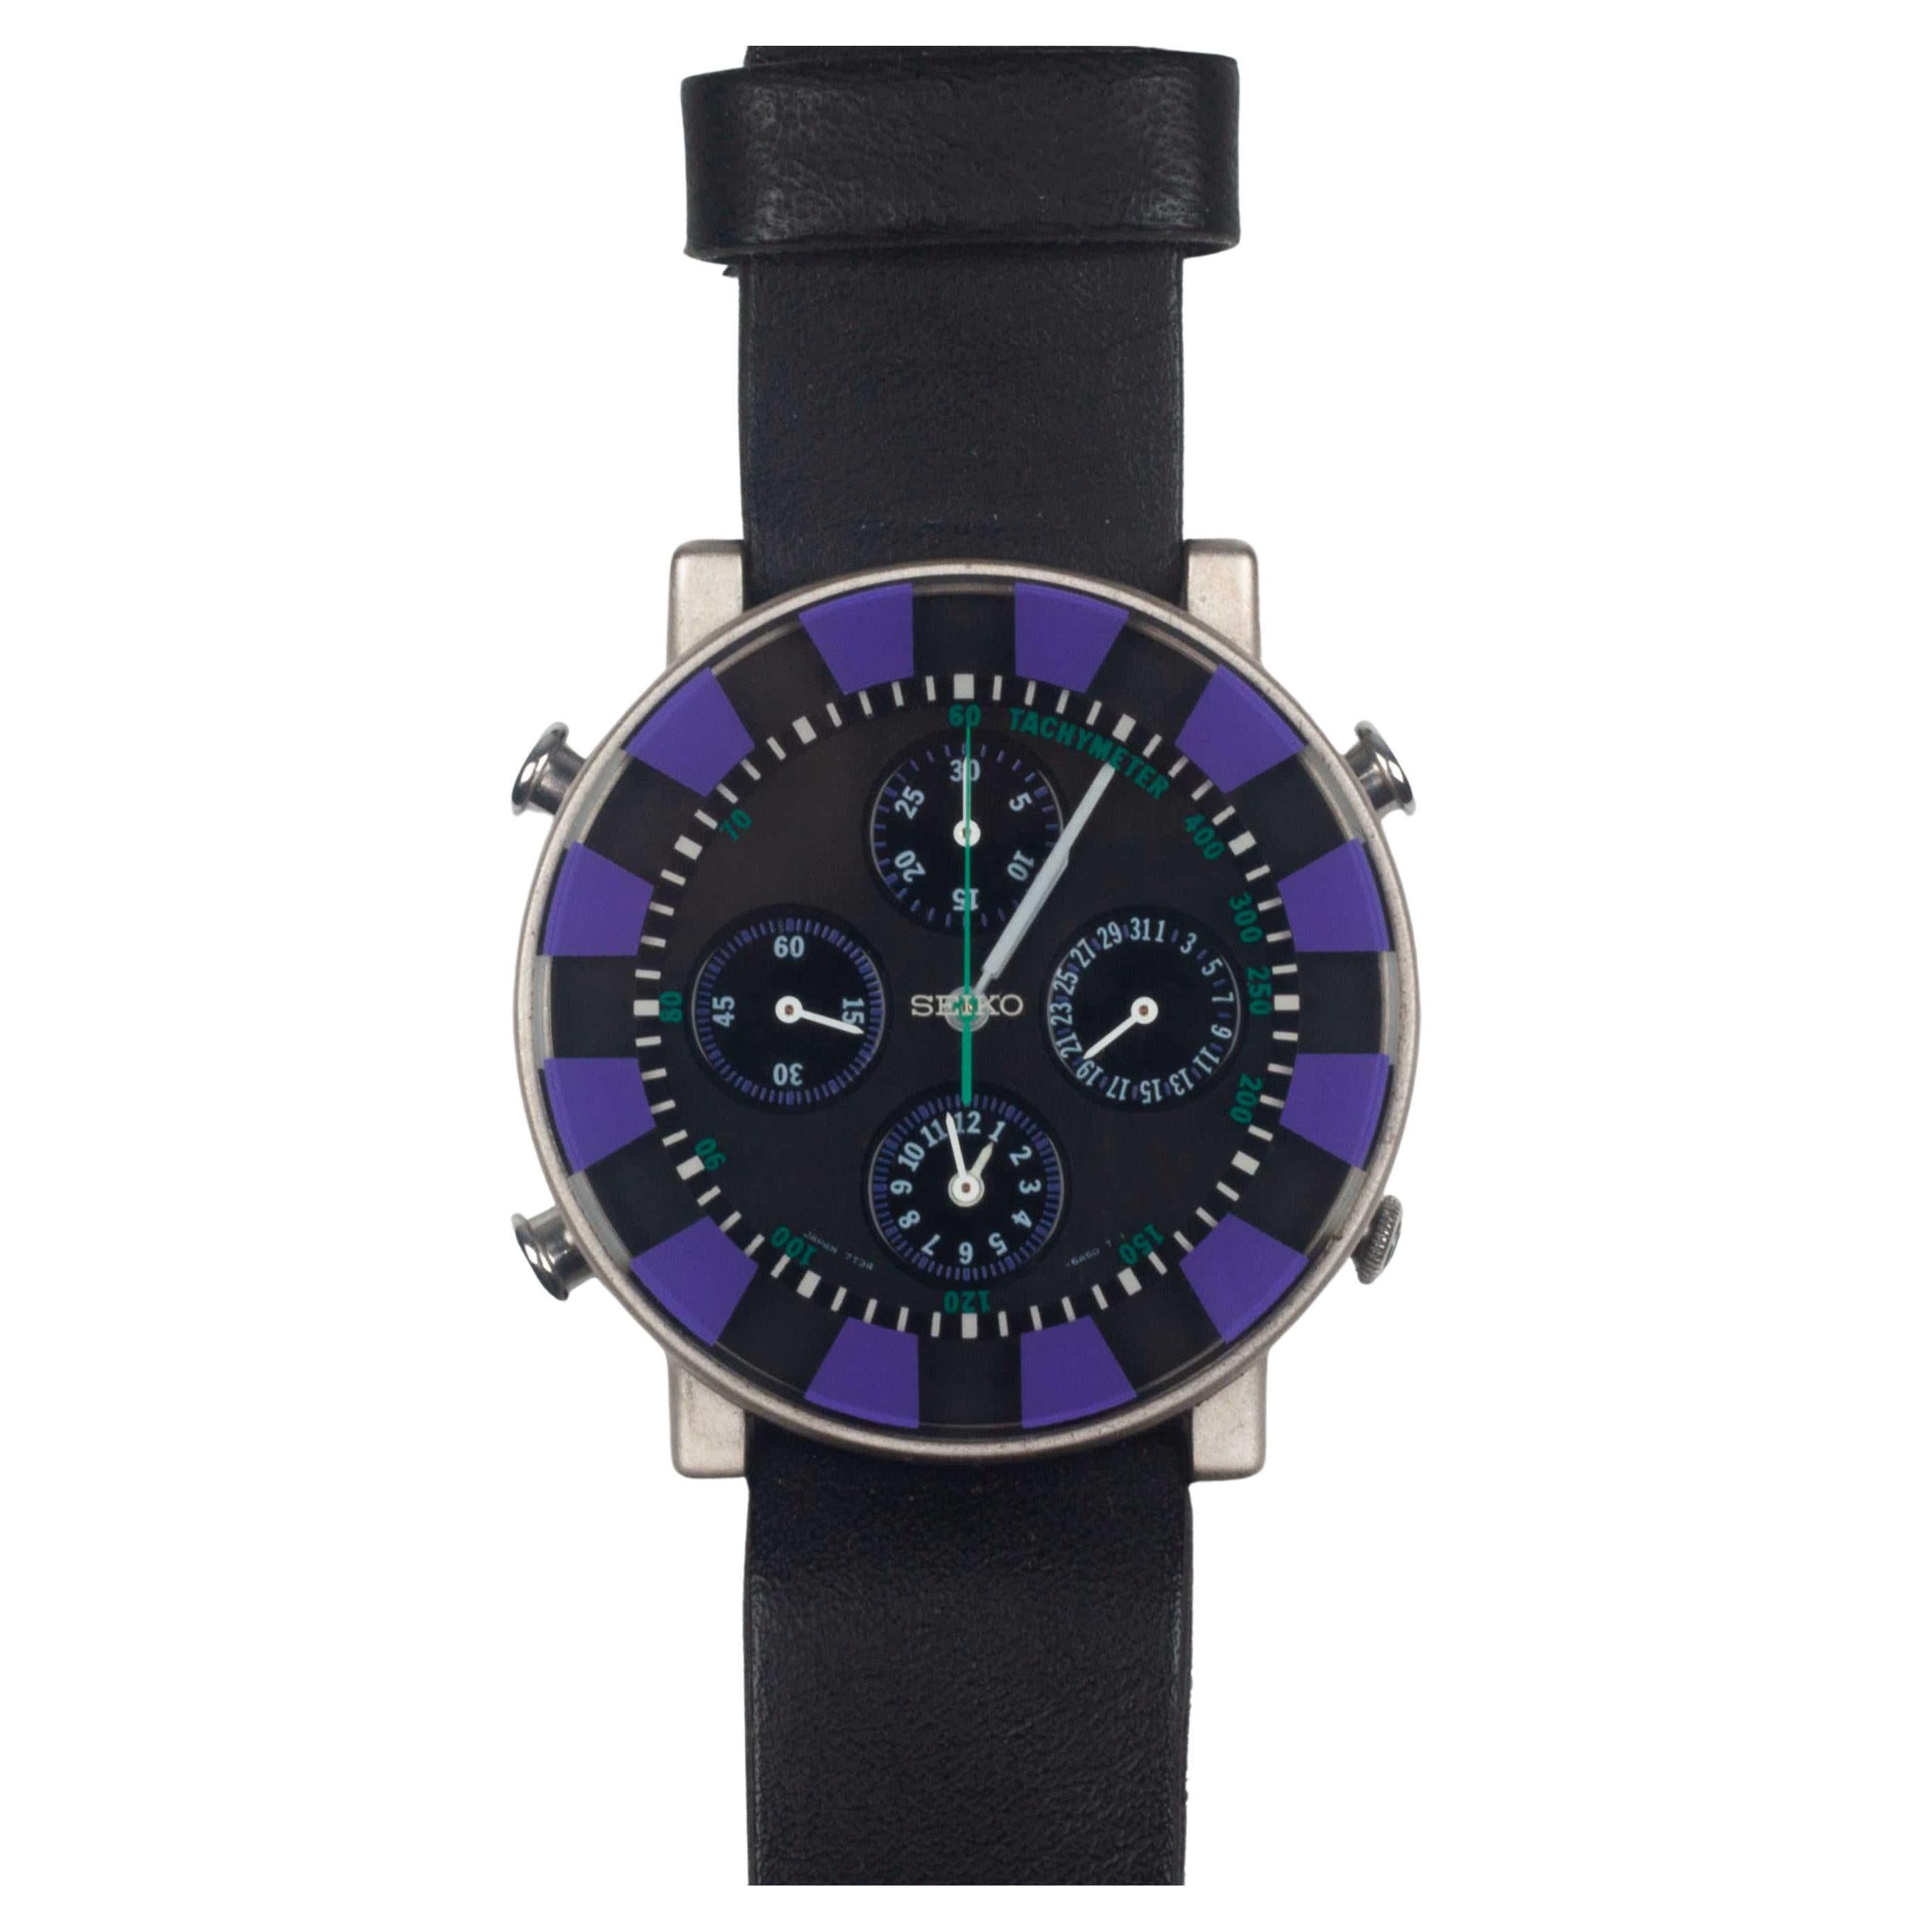 Ettore Sottsass Chronograph, Collection Sottsass for Seiko, Purple, Japan, 1993